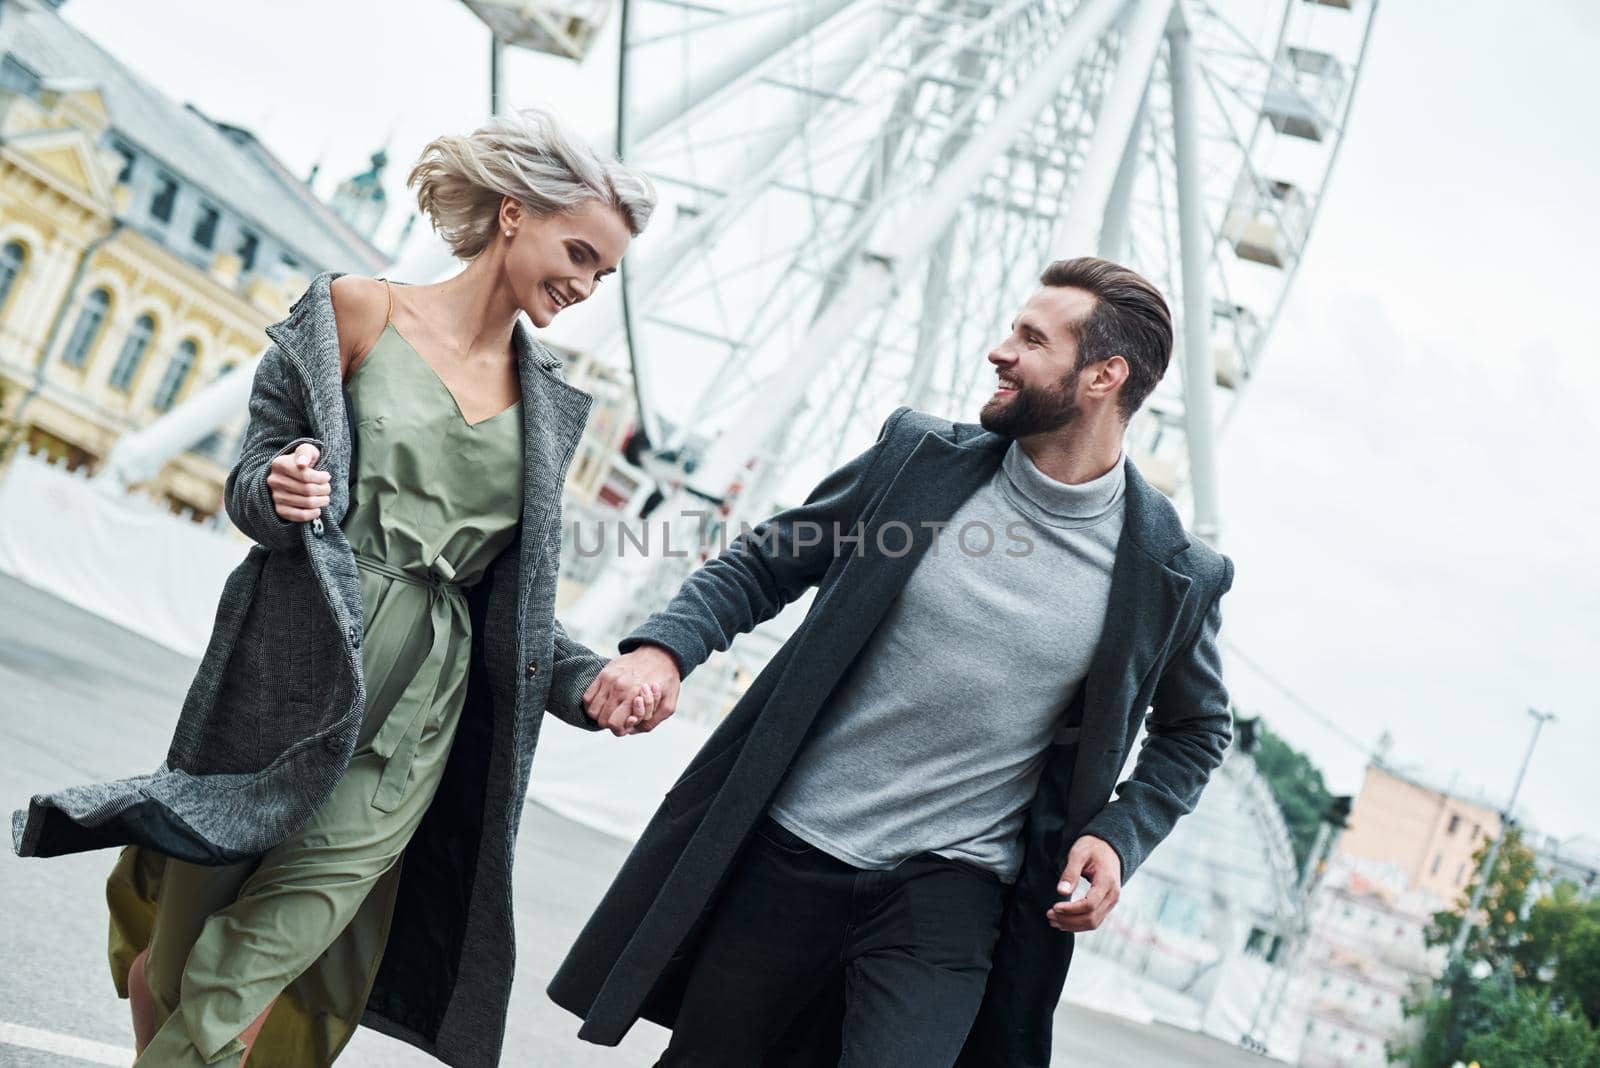 Romantic date outdoors. Young couple running at entertainment park holding hands looking at each other smiling happy